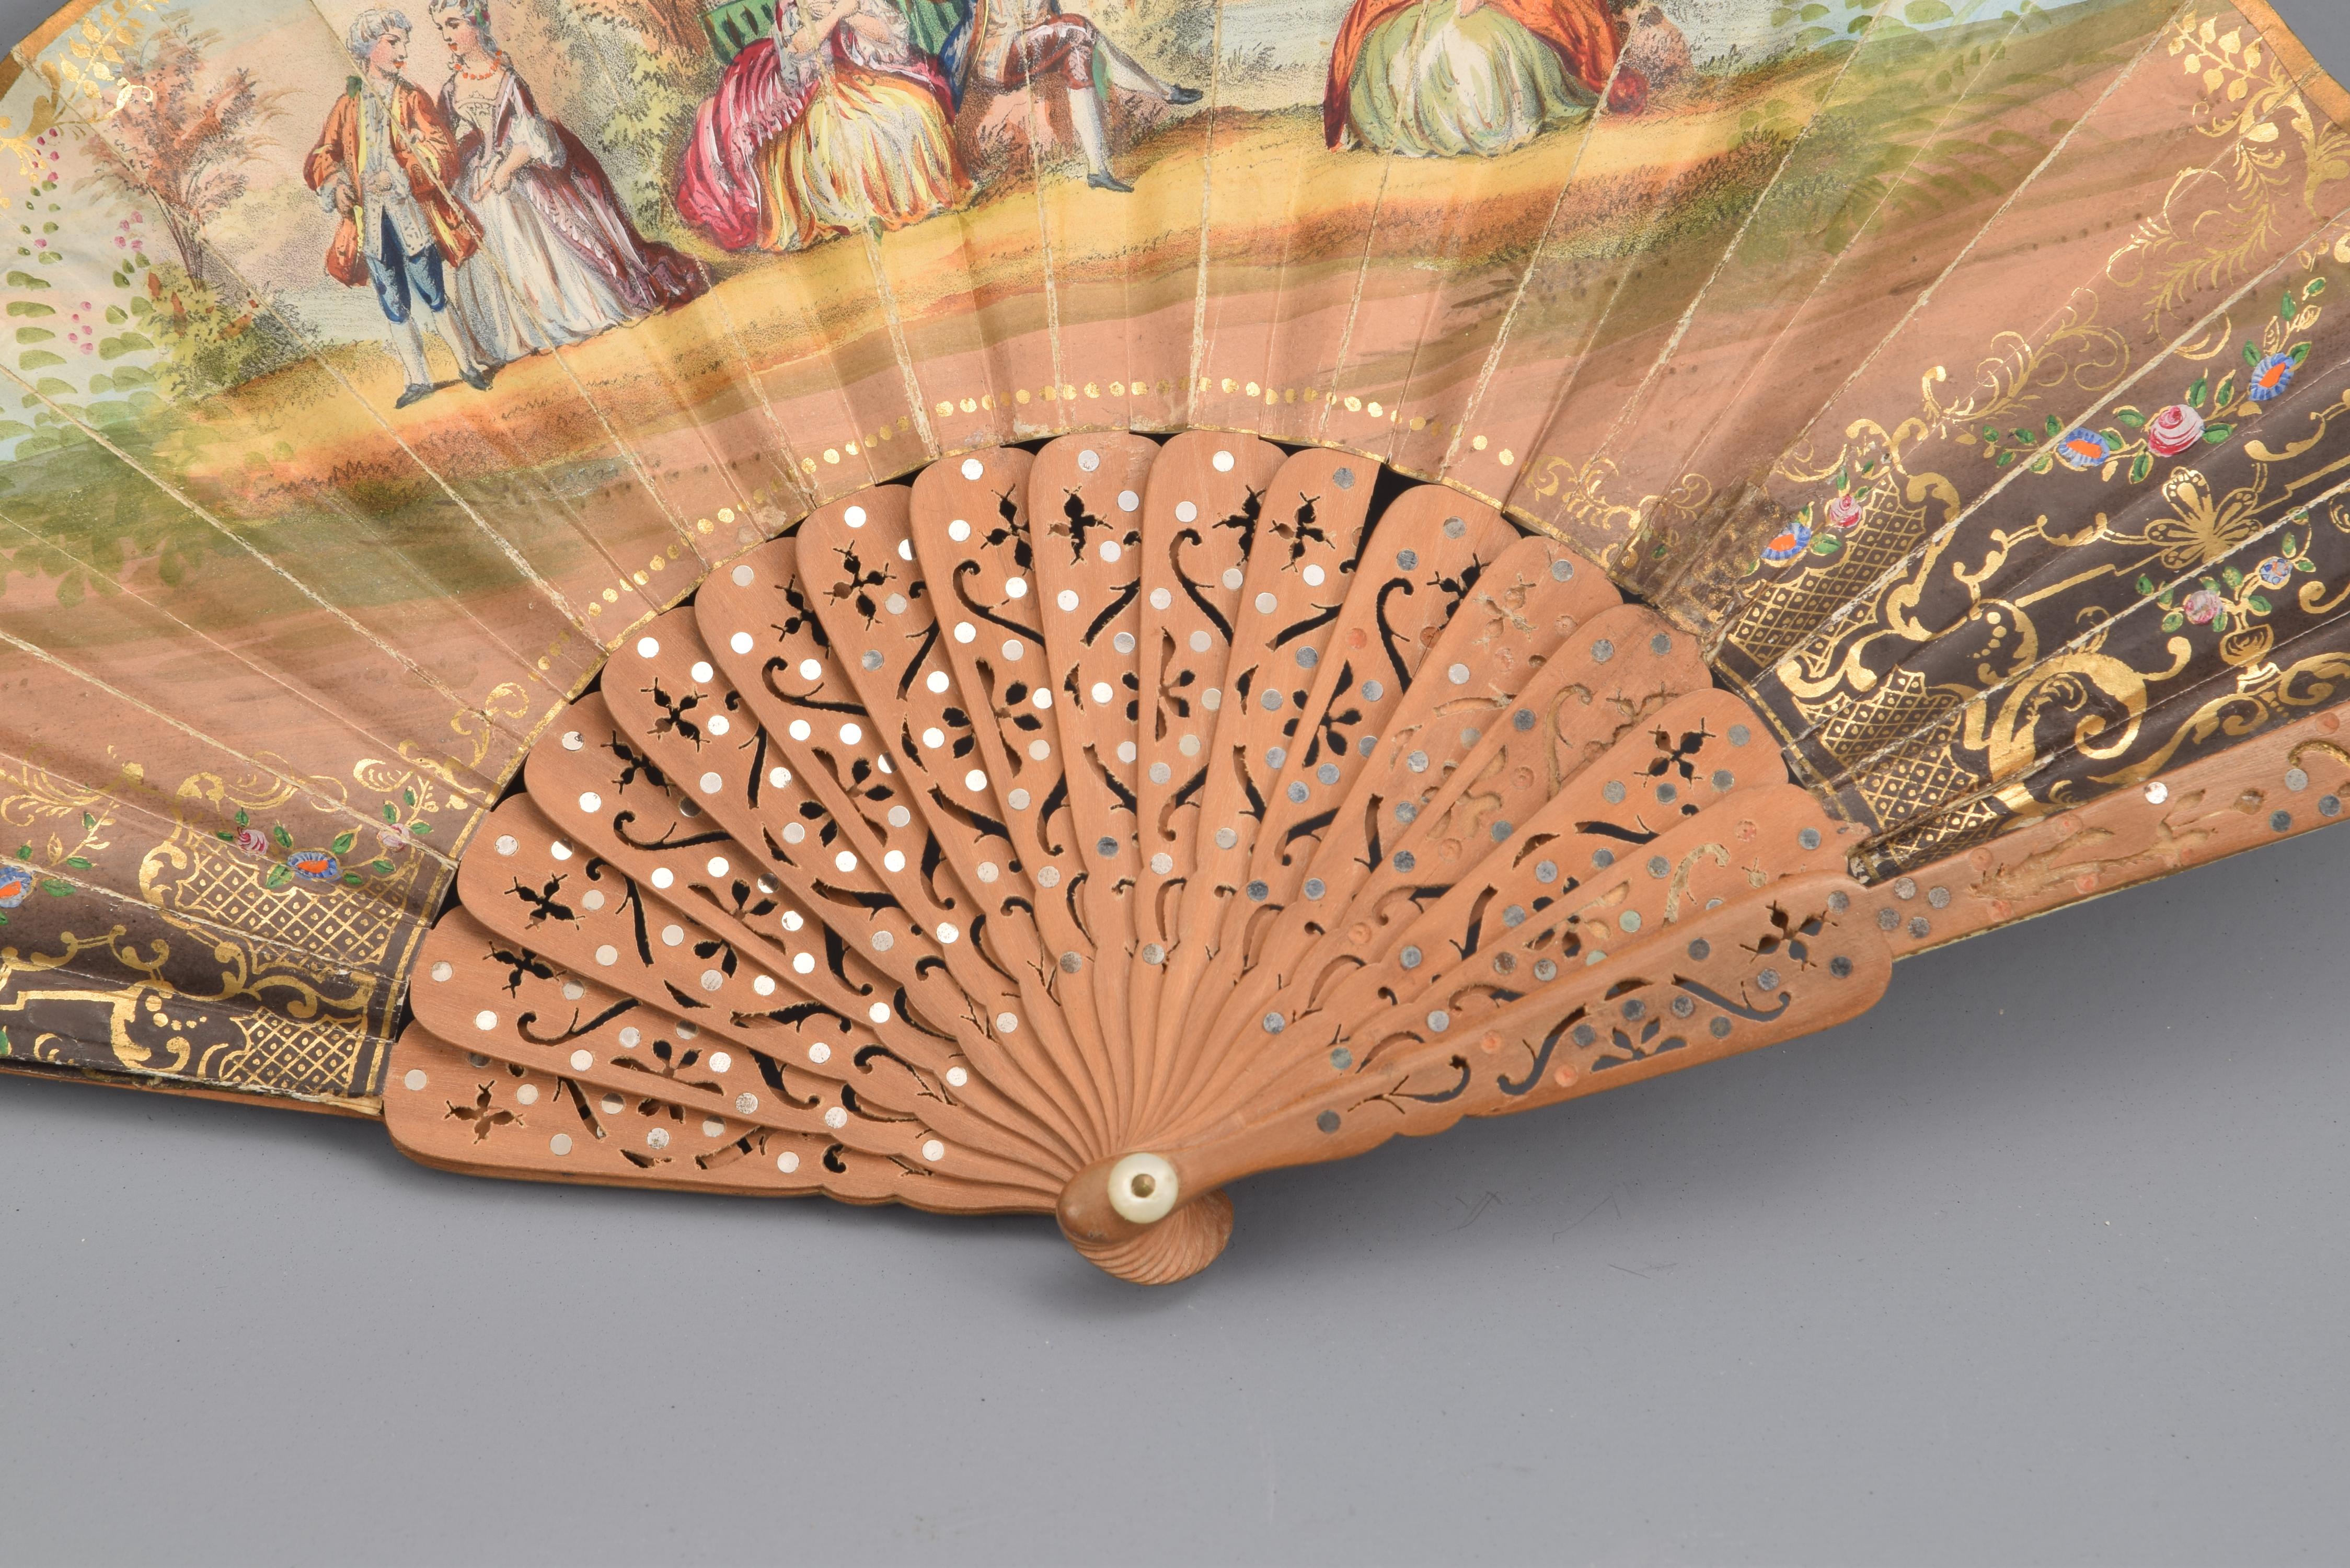 Hand fan. Wooden linkage, 19th century.
Fan with openwork wooden rods that presents a country and a court scene in the country, decorations enhanced with plant elements and compositions of mesh and dots. This scene, with two couples and a lady